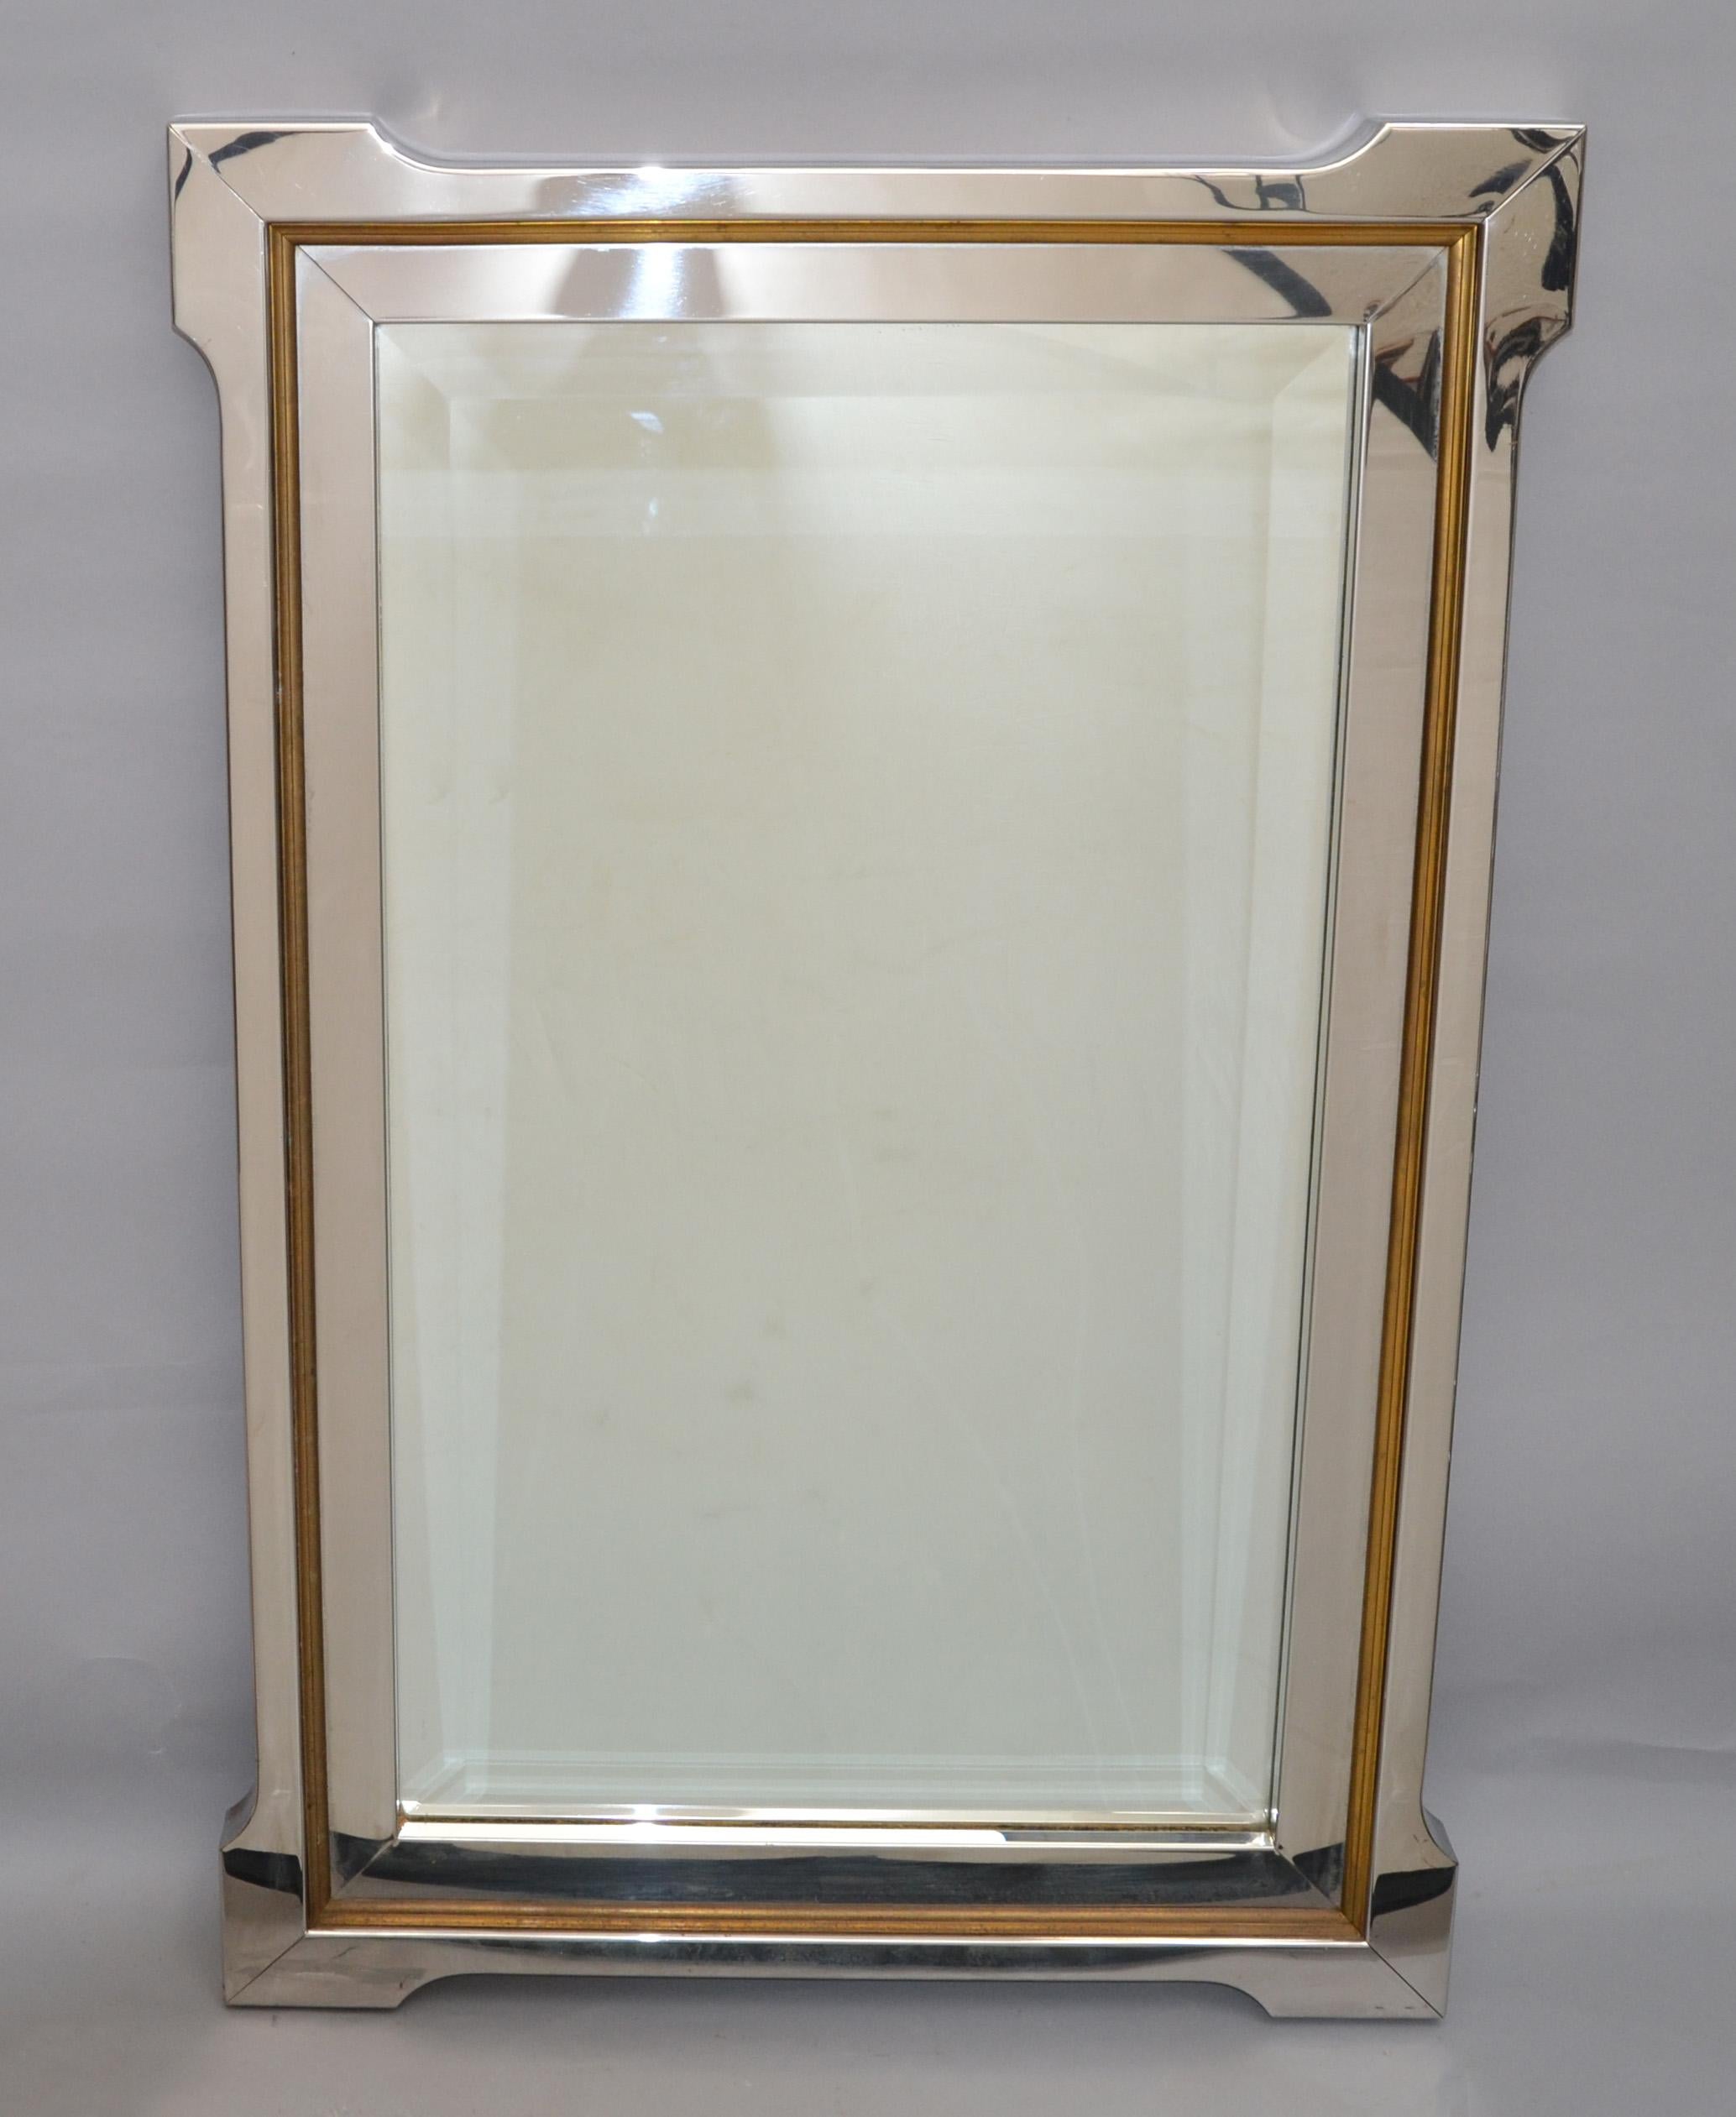 Pierre Cardin Style Mid-Century Modern Chrome, Brass & Wood beveled Wall Mirror  For Sale 1